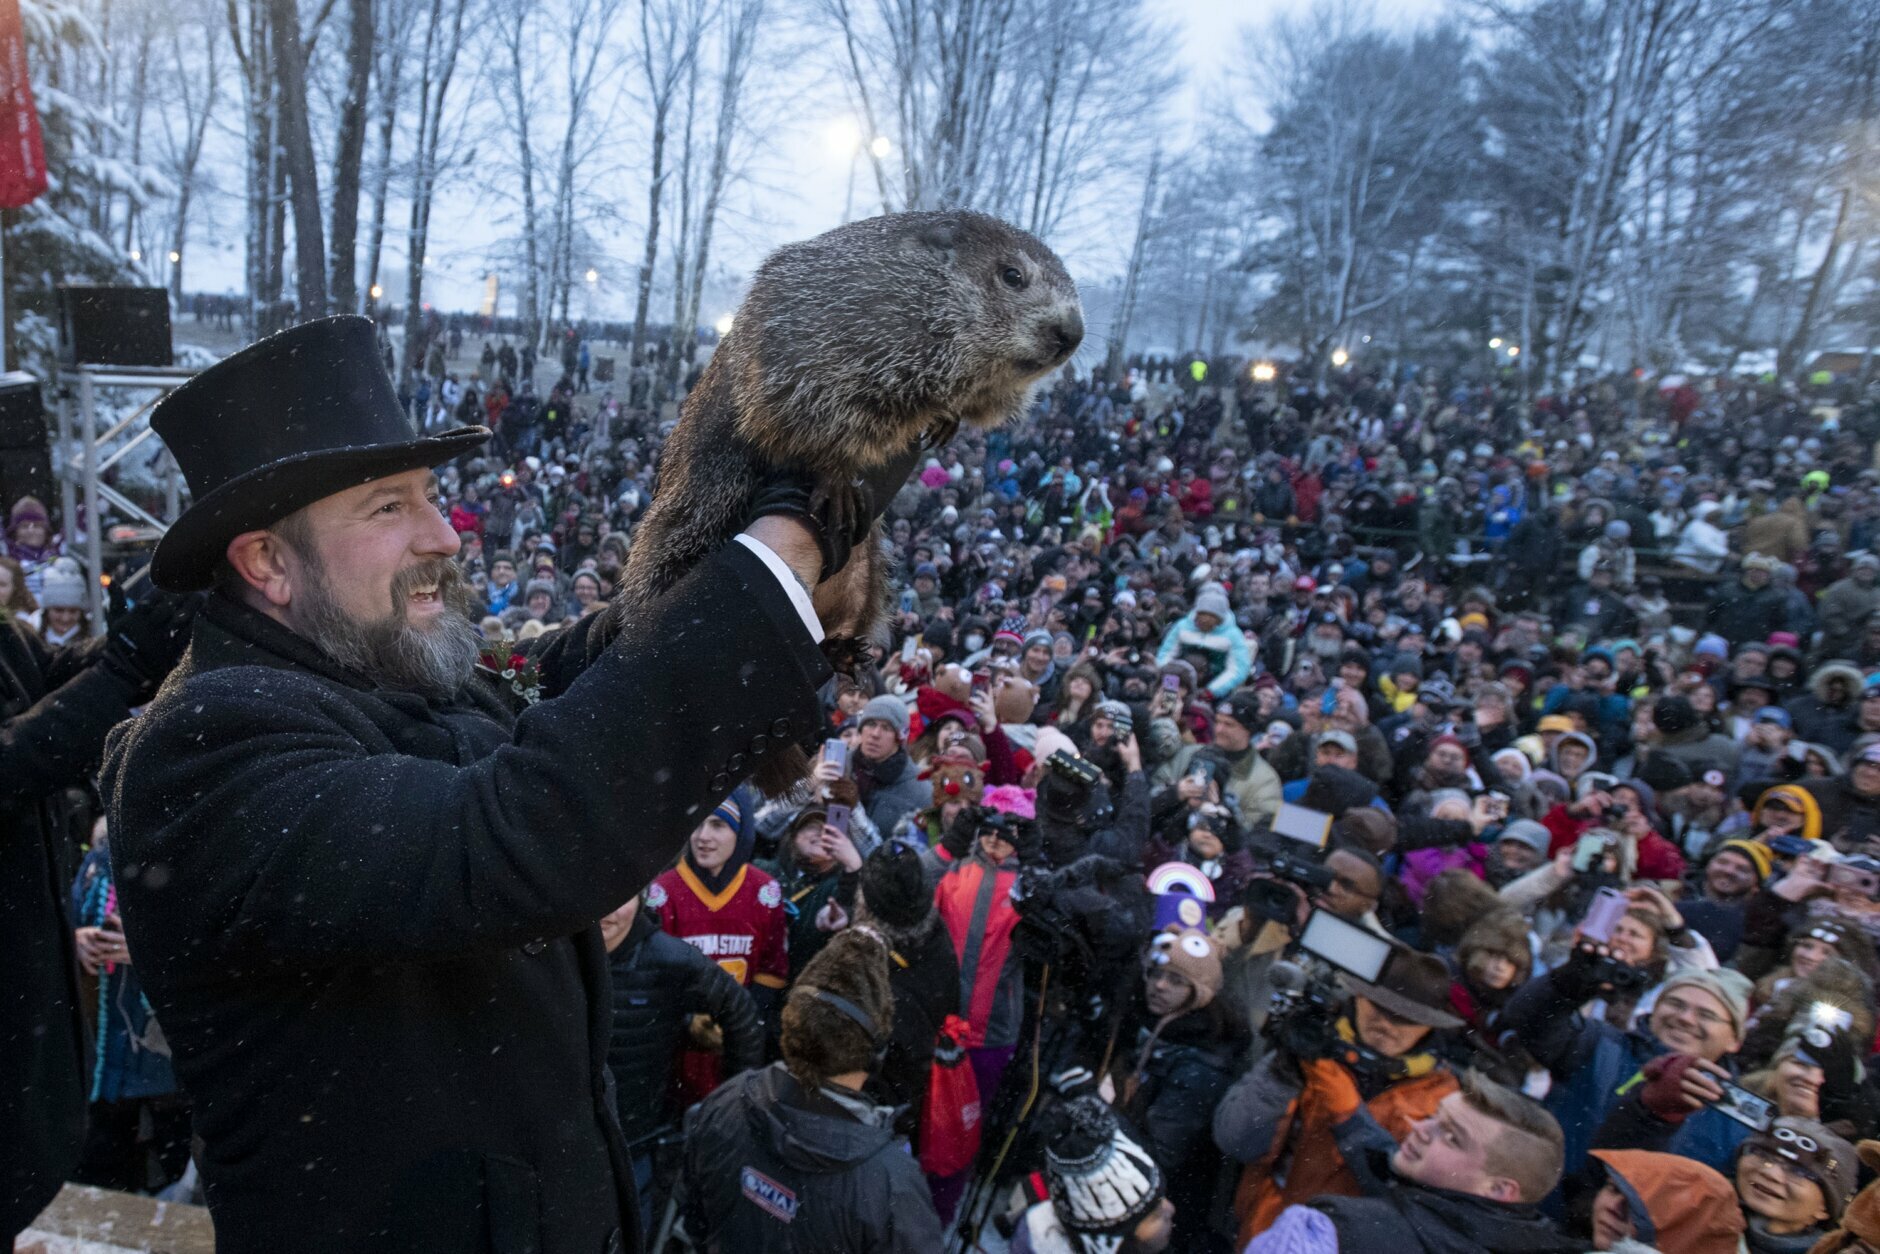 FILE - In this Feb. 2, 2020 file photo, Groundhog Club co-handler Al Dereume holds Punxsutawney Phil during the 134th celebration of Groundhog Day on Gobbler's Knob in Punxsutawney, Pa. The coronavirus pandemic means Groundhog Day won't be the same in the Pennsylvania town long associated with a prognosticating rodent. Organizers said Punxsutawney Phil will predict whether spring will come early or winter will last longer in 2021 without the usual crowds who gather at Gobbler's Knob.  Phil and his inner circle on Feb. 2 will deliver the prediction virtually by means of a live internet steam and website, organizers said.  